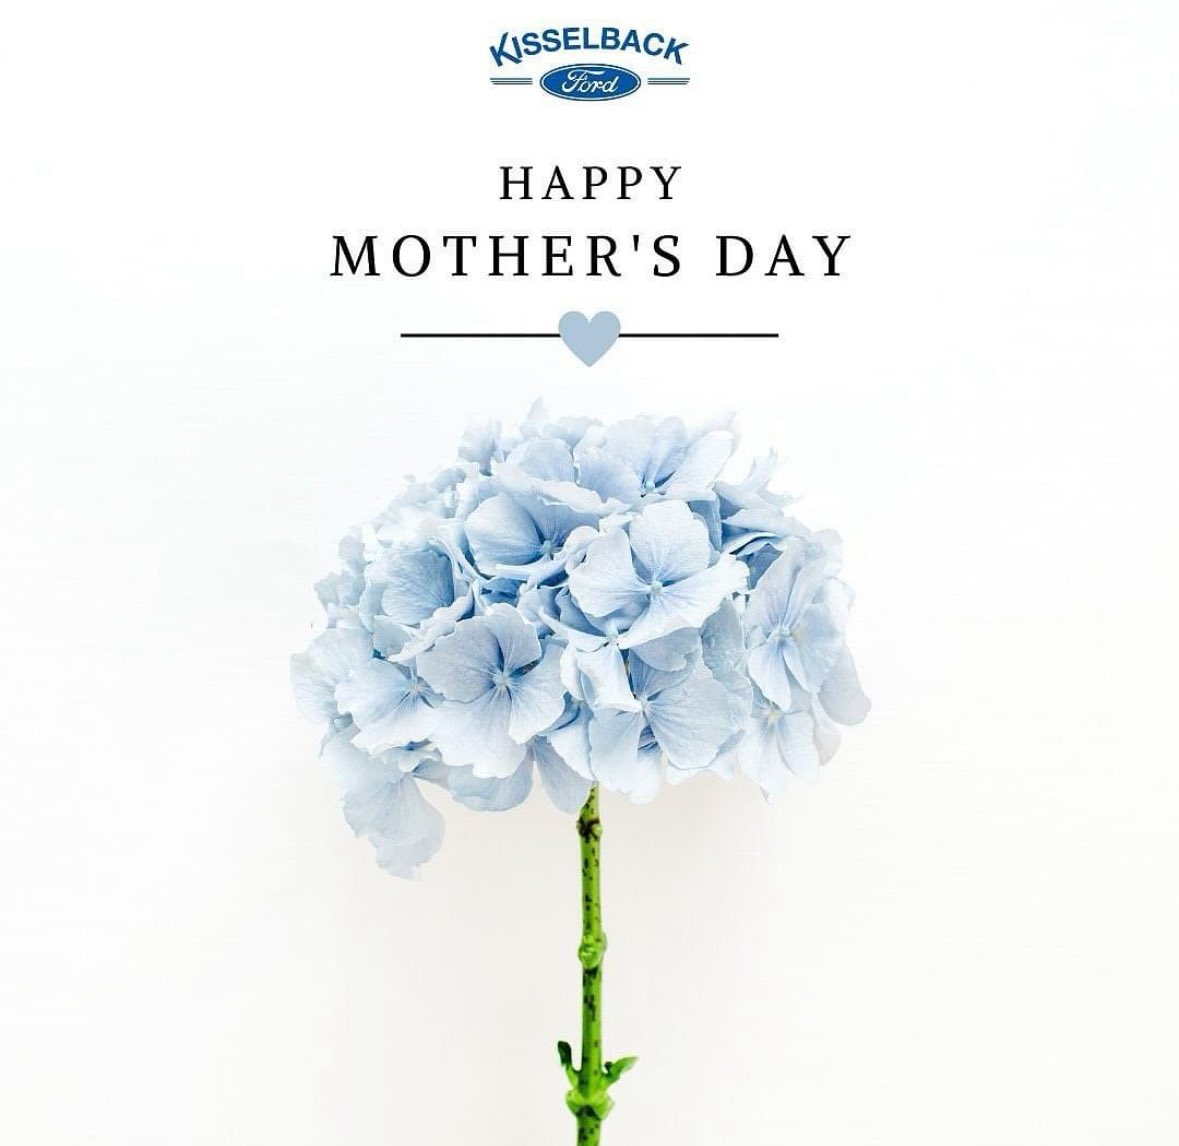 Wishing all of the incredible moms in our community a very happy #MothersDay!